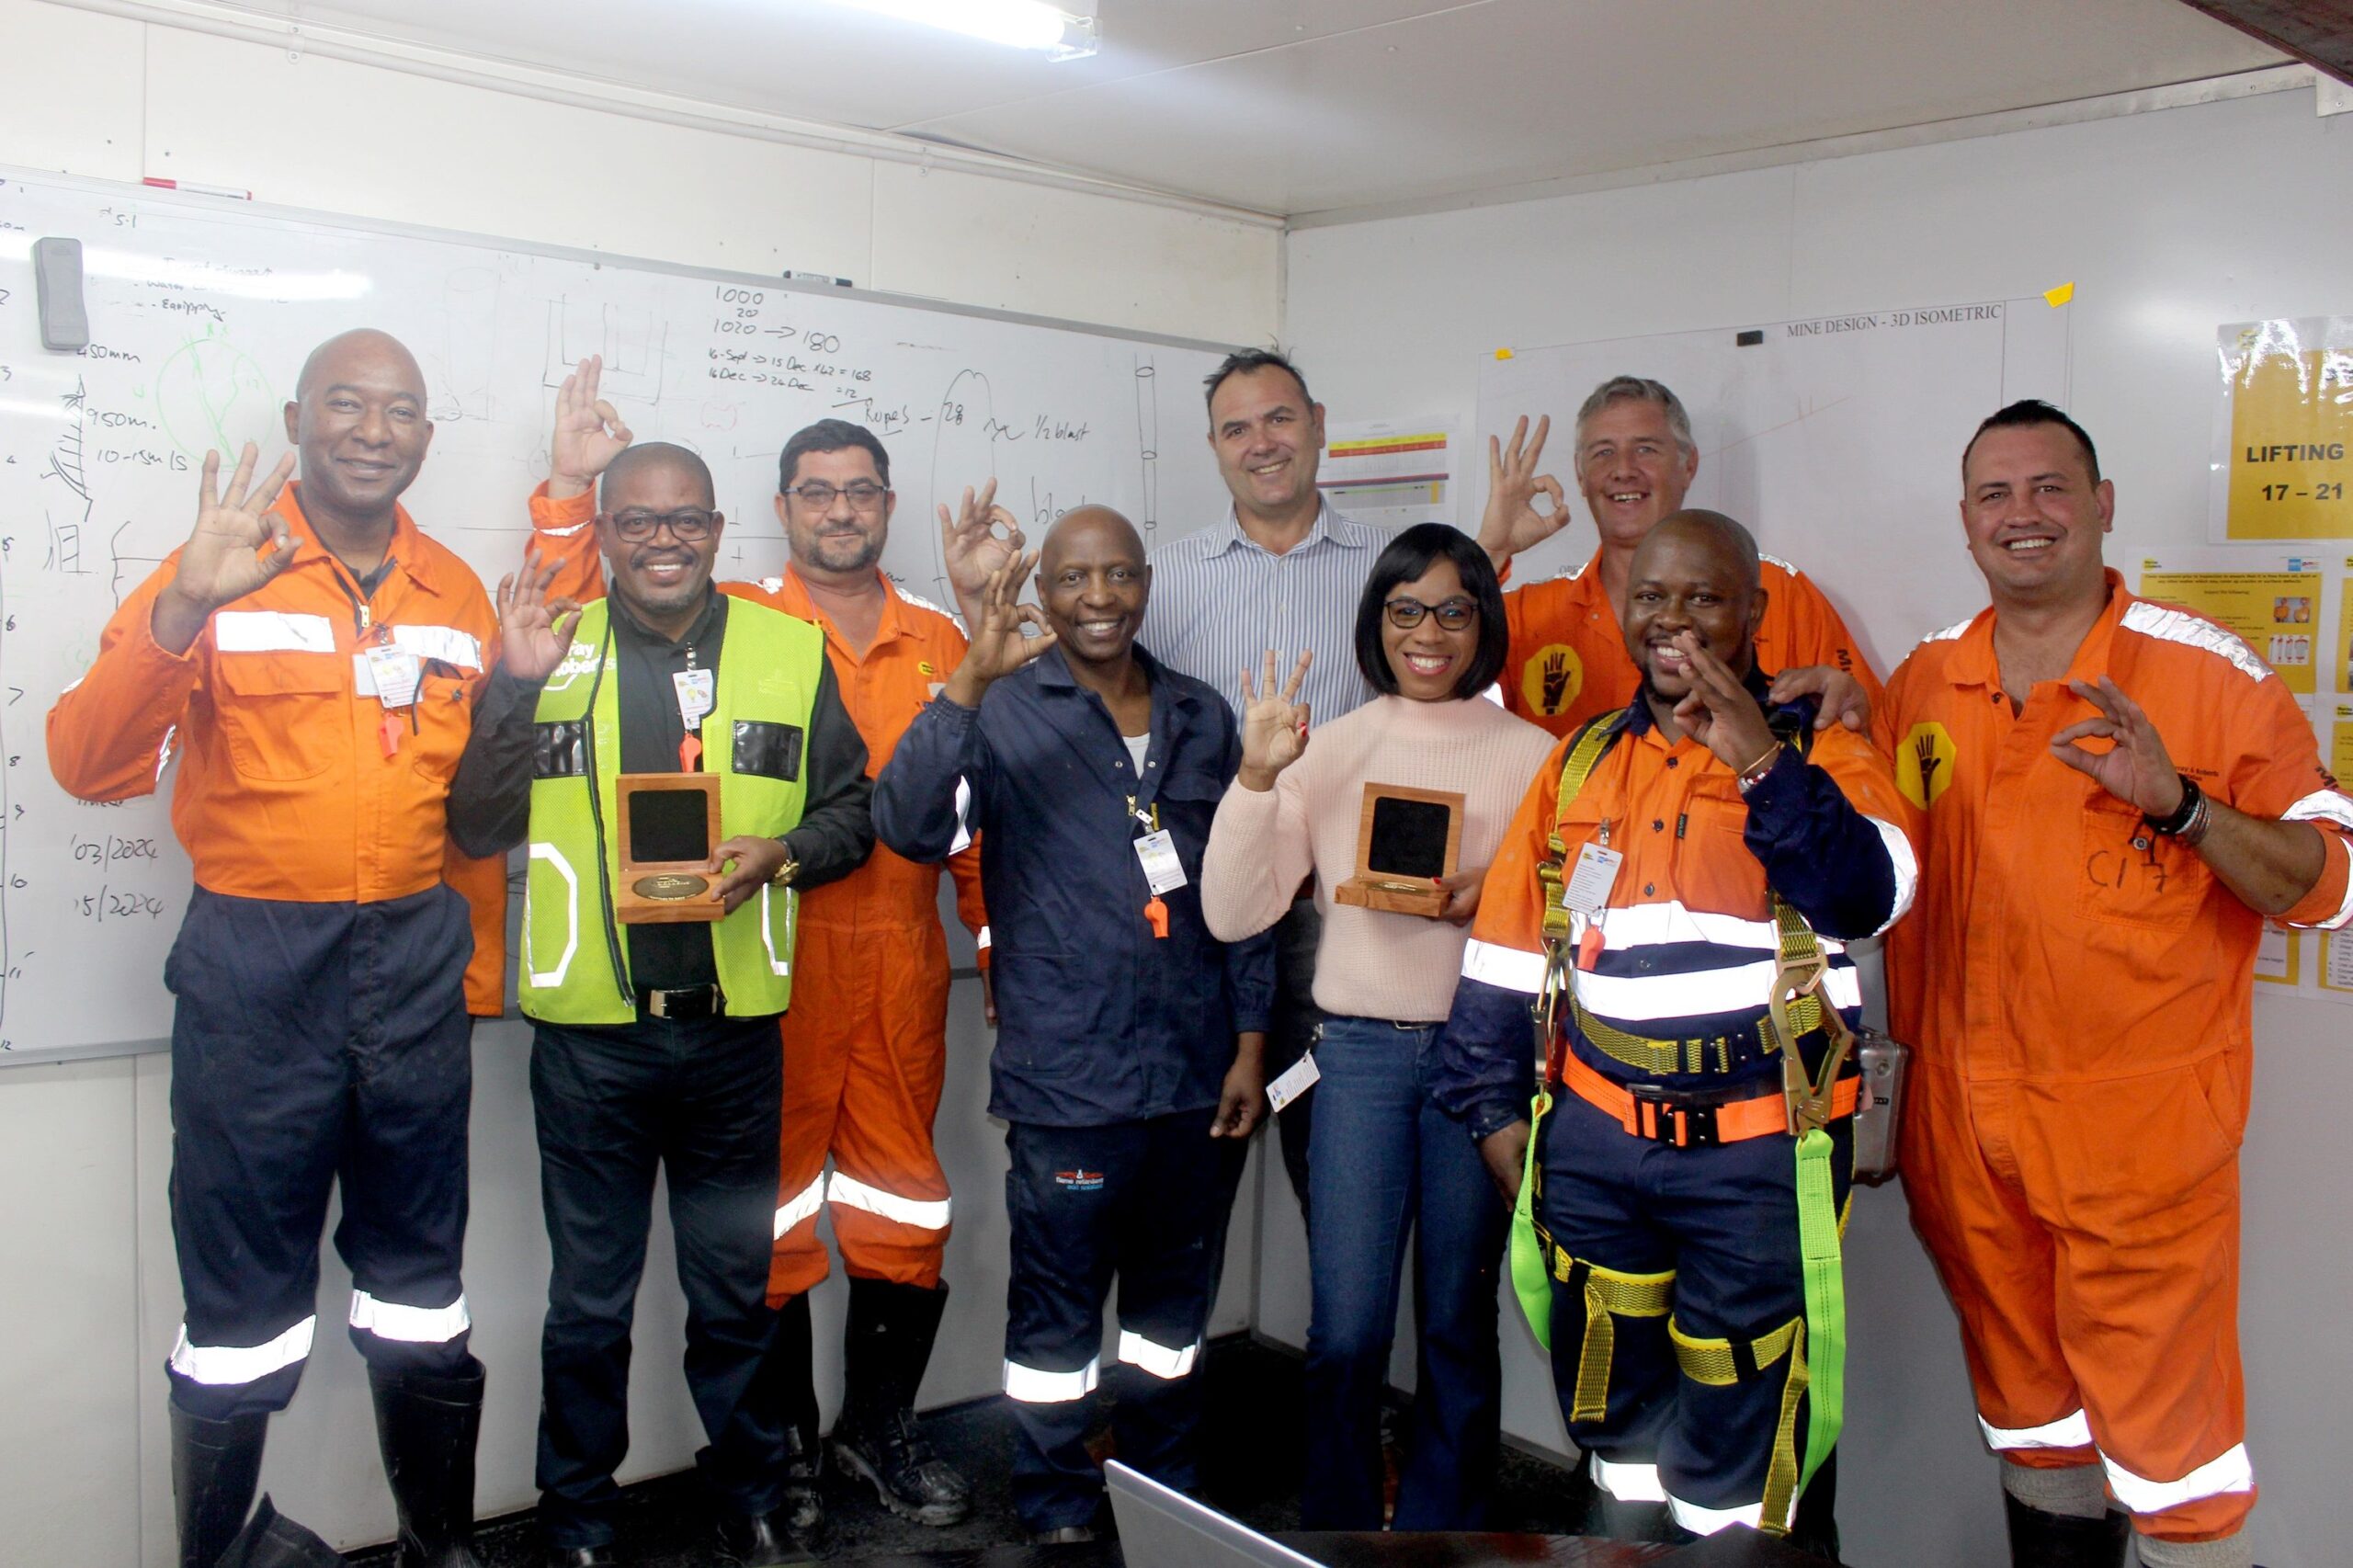 Some of the team on the Murray & Roberts Cementation PMC Ventilation Shaft Project celebrating having won two awards at the annual CE Safety Awards.